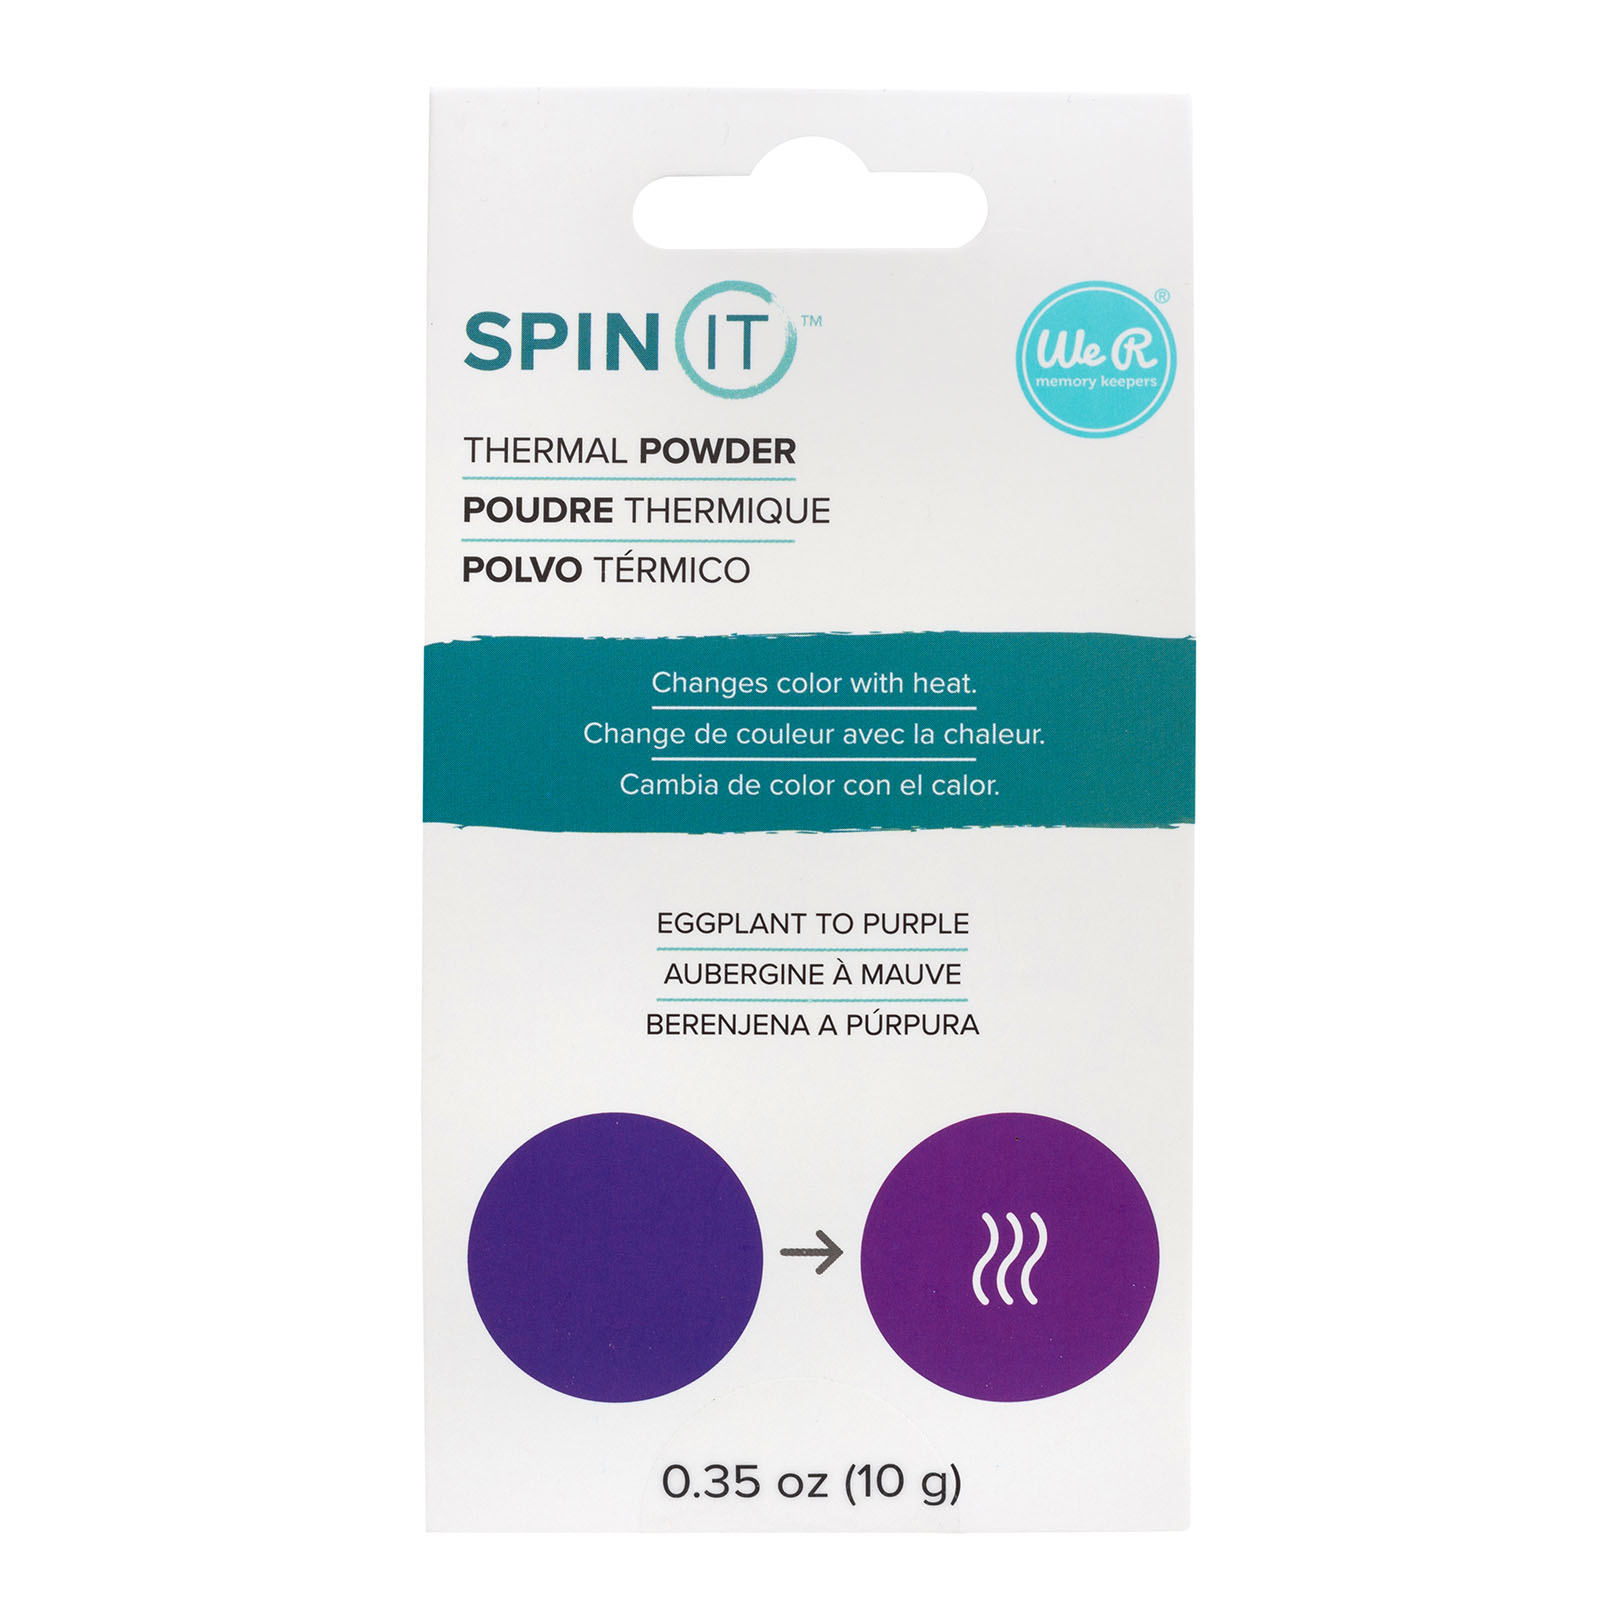 We R Makers • Spin IT thermal powder Eggplant to Purple